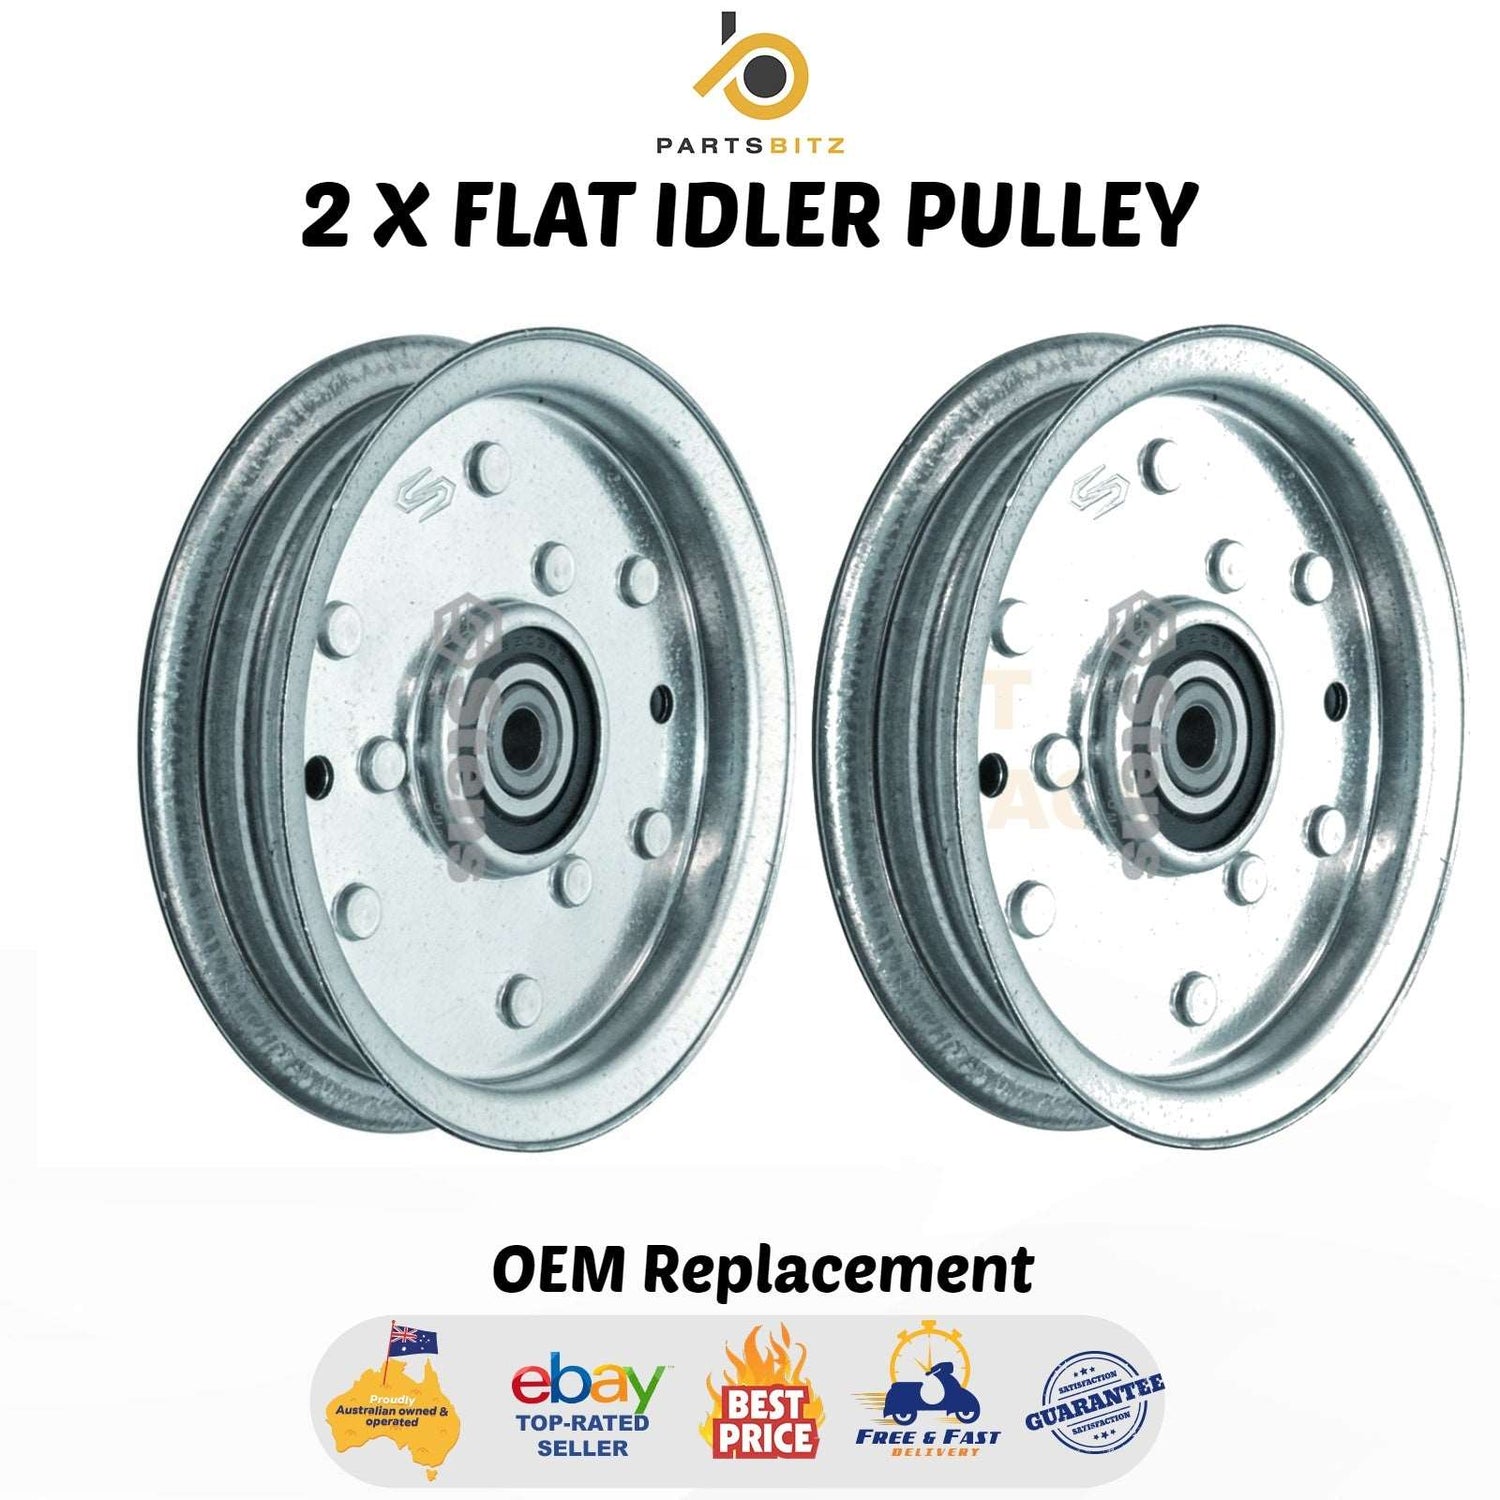 2 X Flat Idler Pulley for Cub Cadet & Mtd Ride on Mowers 756-04129 , 753-08171